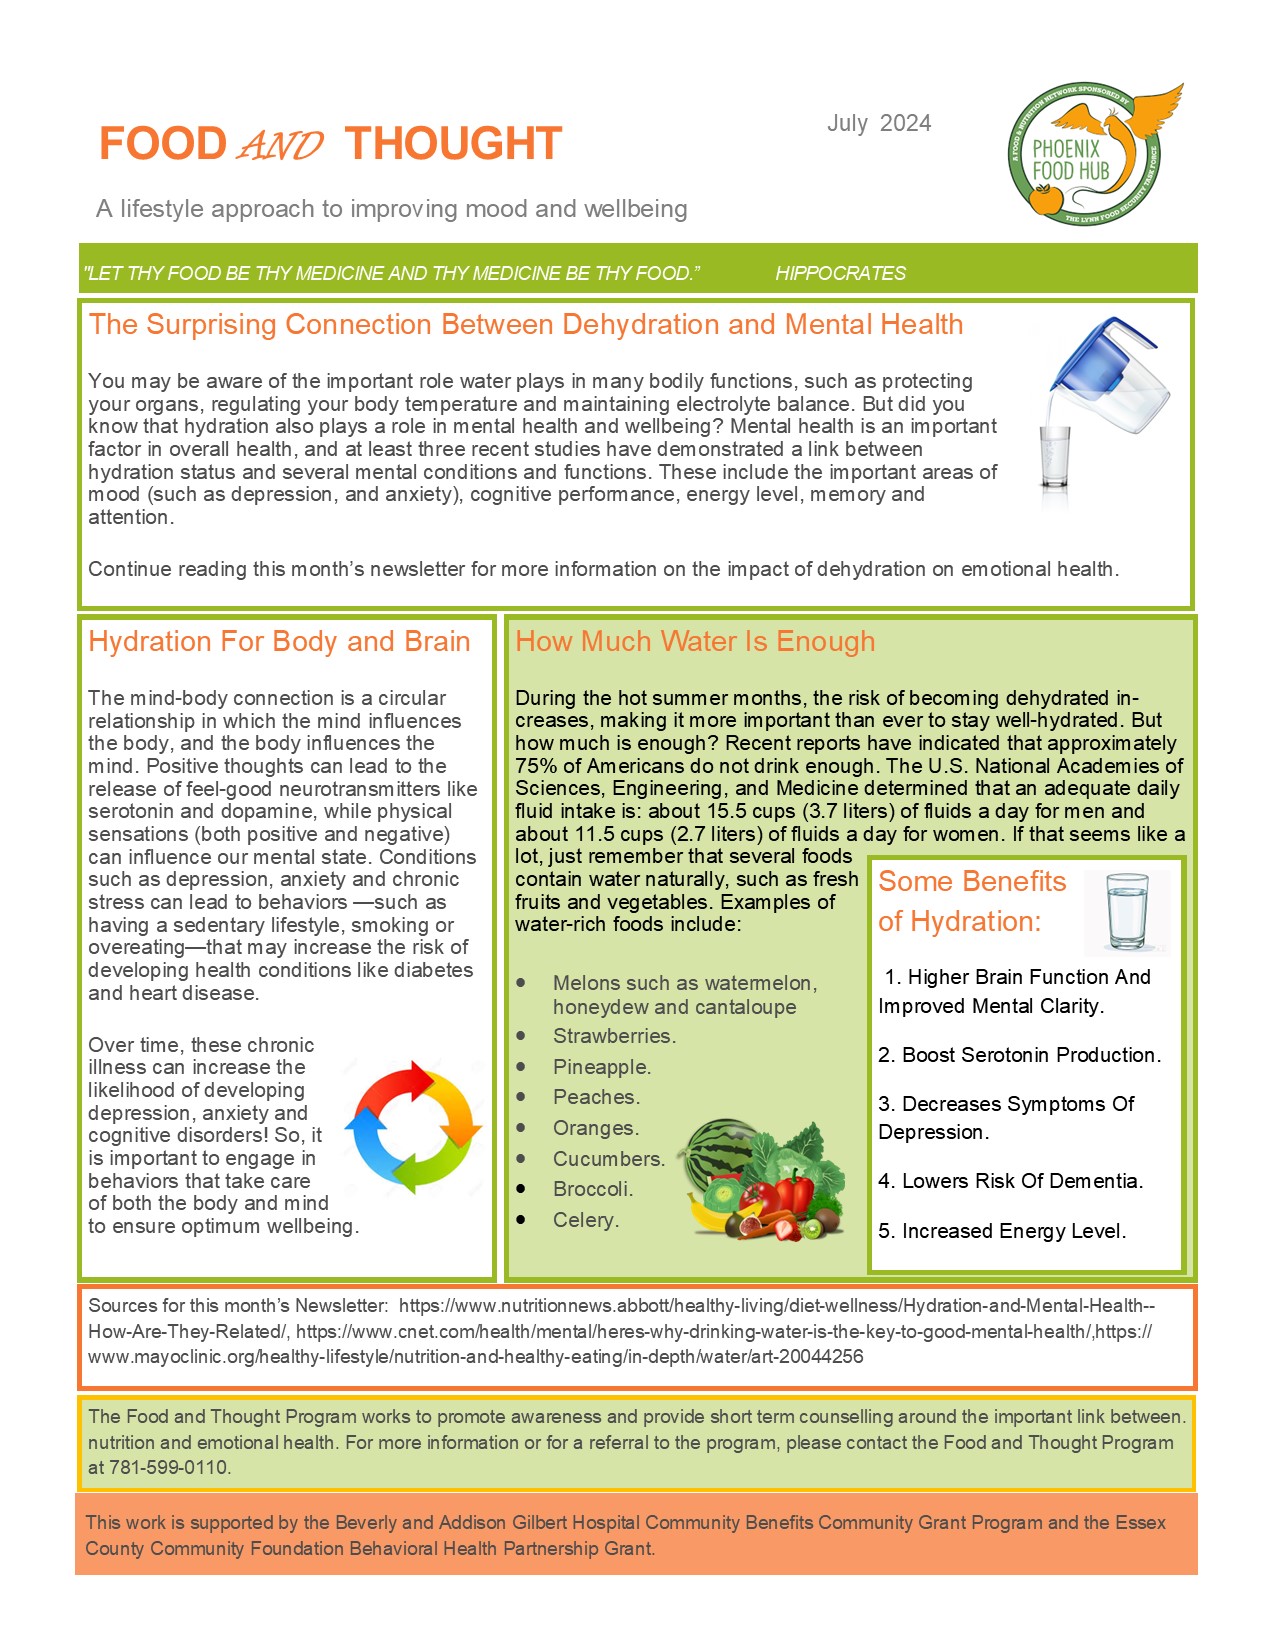 Food For Thought July 2024 Newsletter Corec.jpg